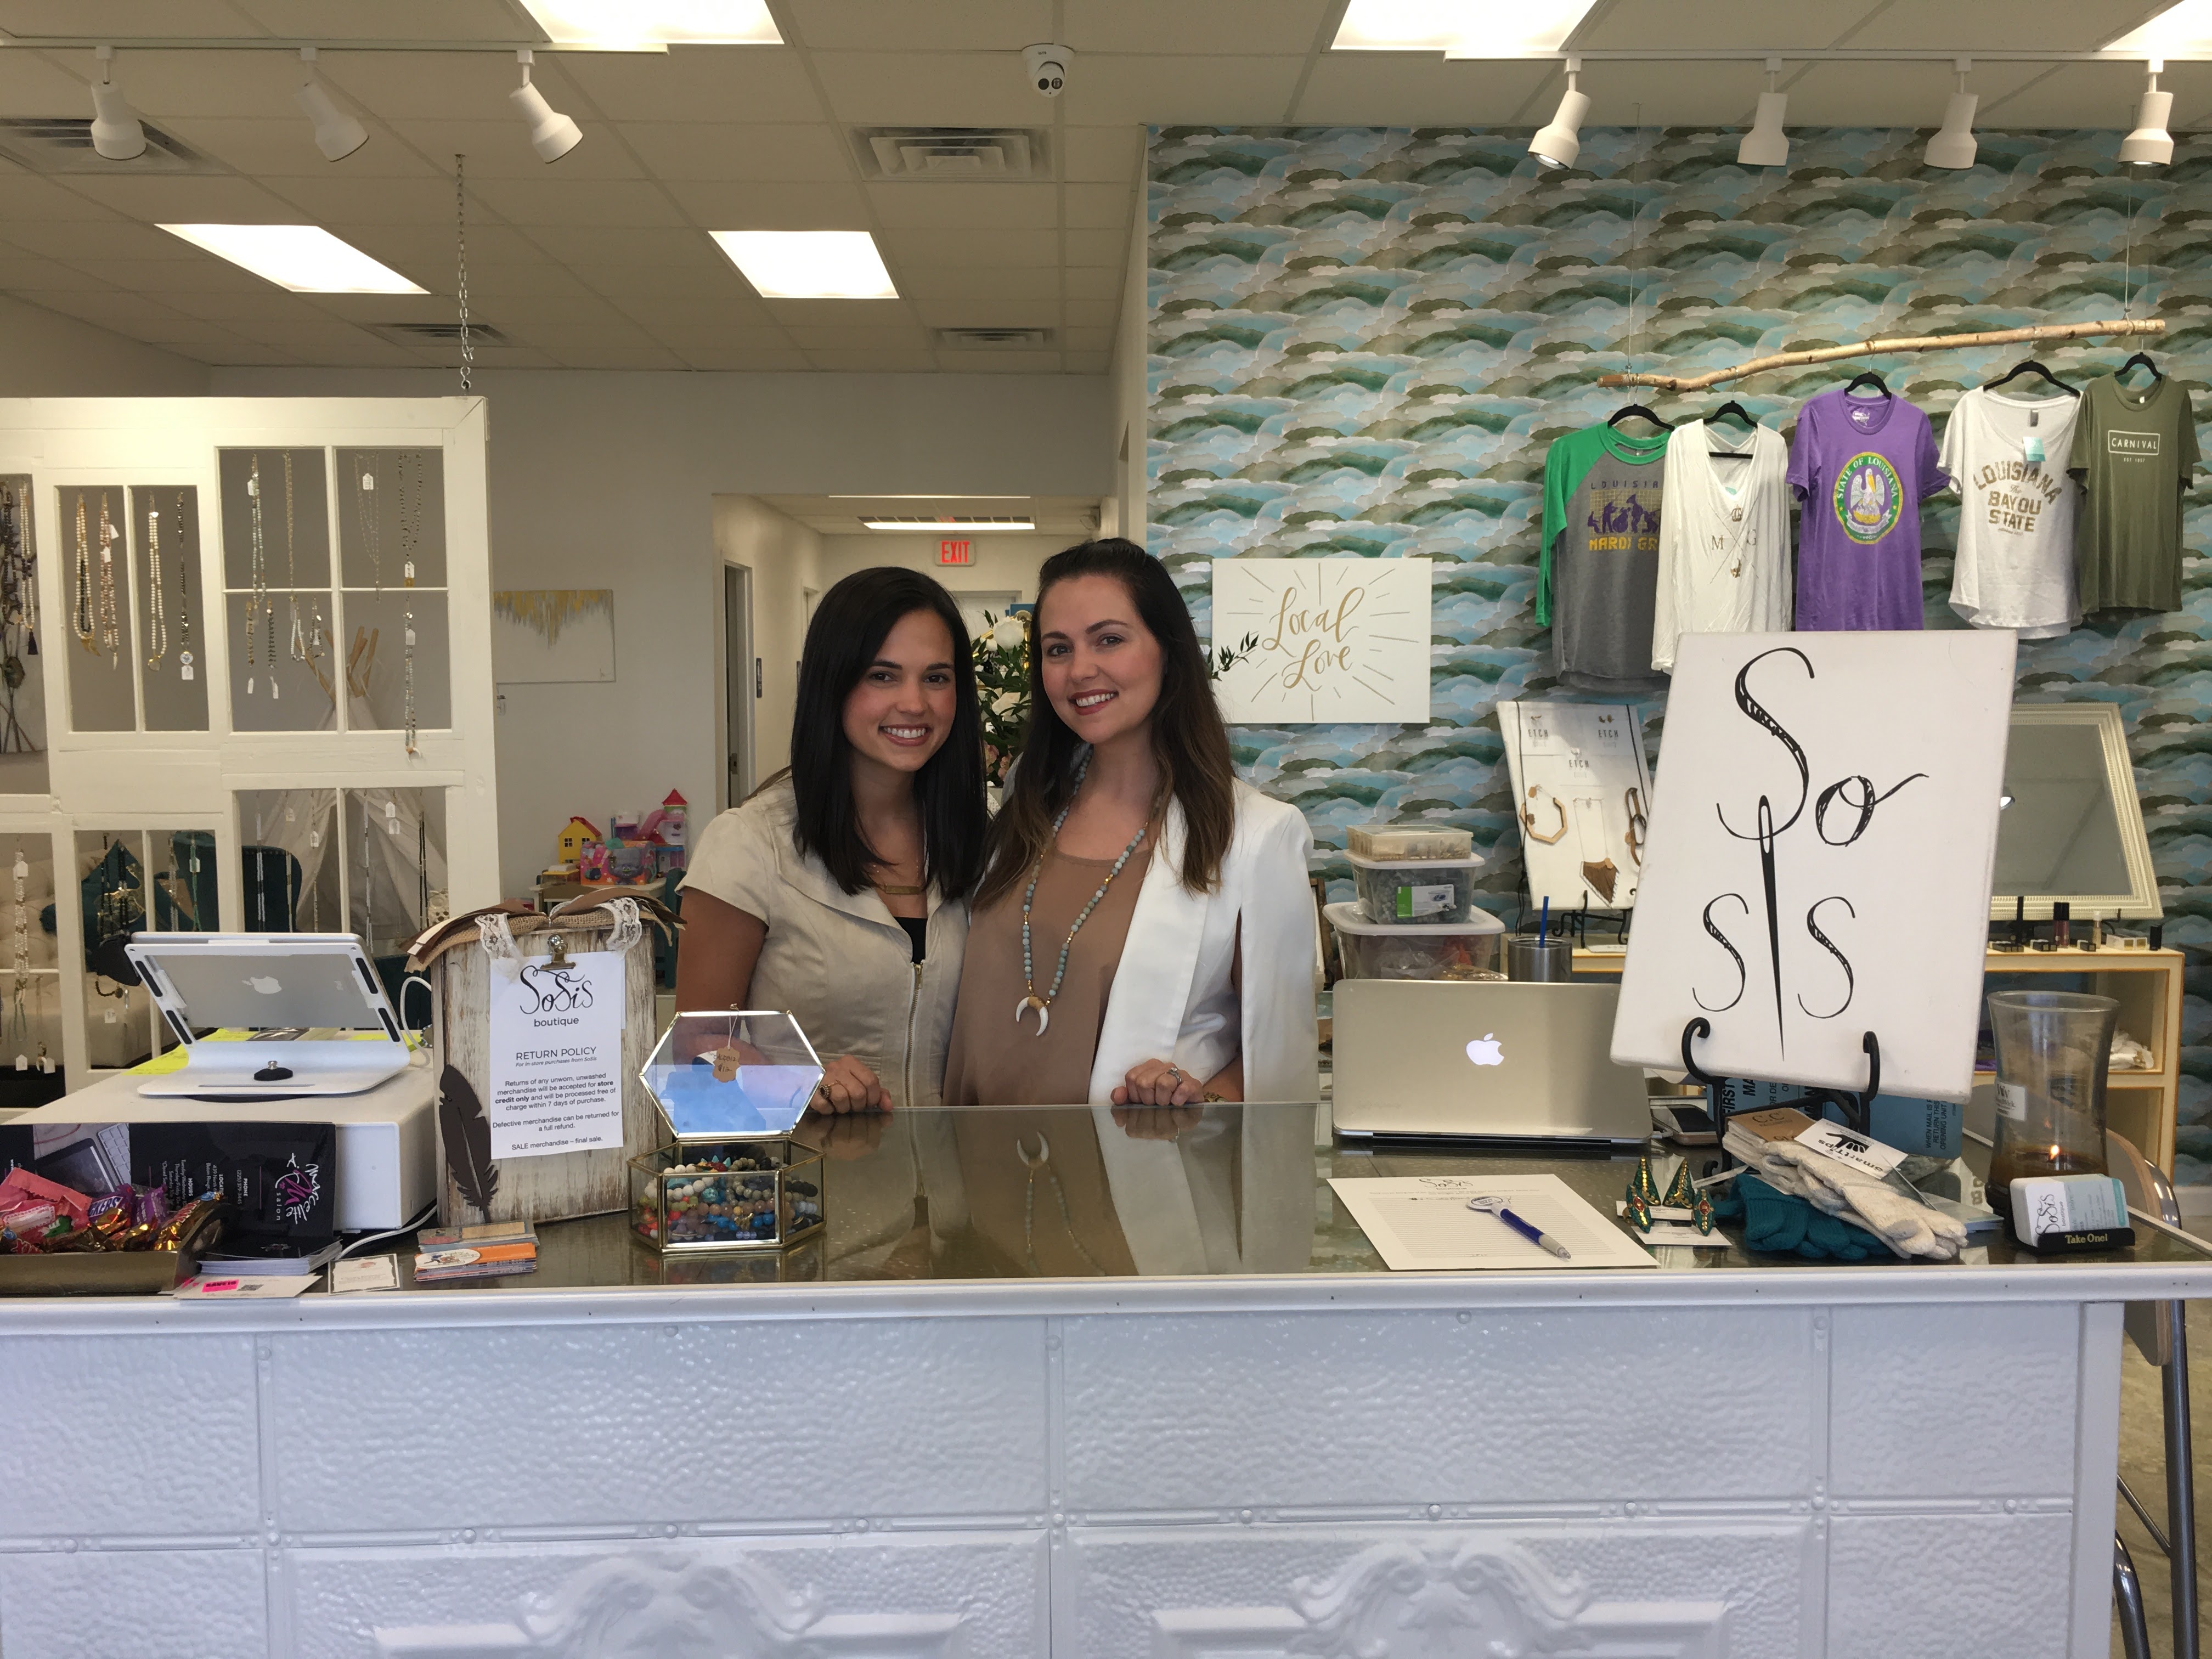 LSBDC SUBR takes sisters online shop to storefront retailer - SoSis Boutique